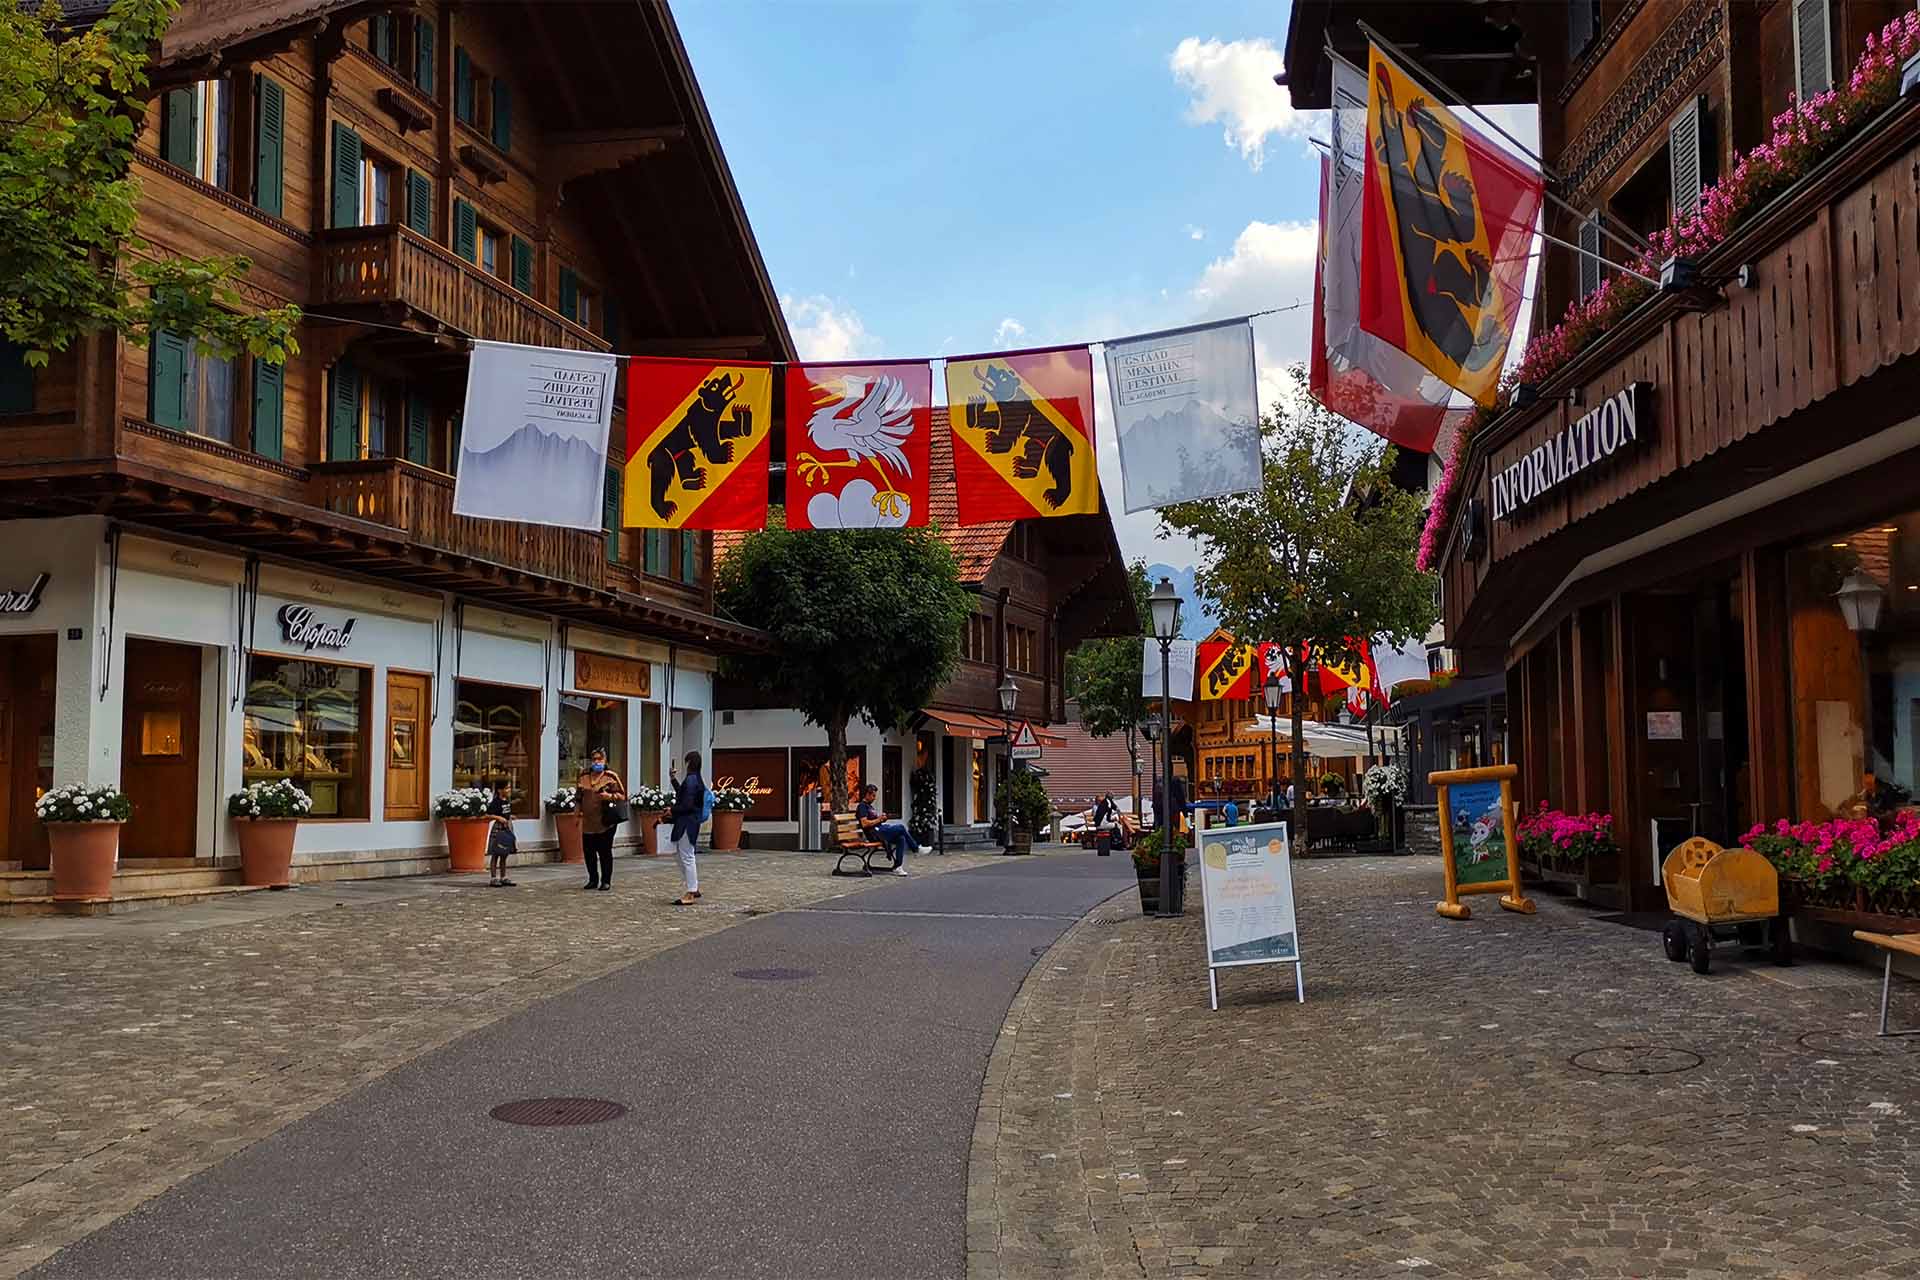 The village of Gstaad.